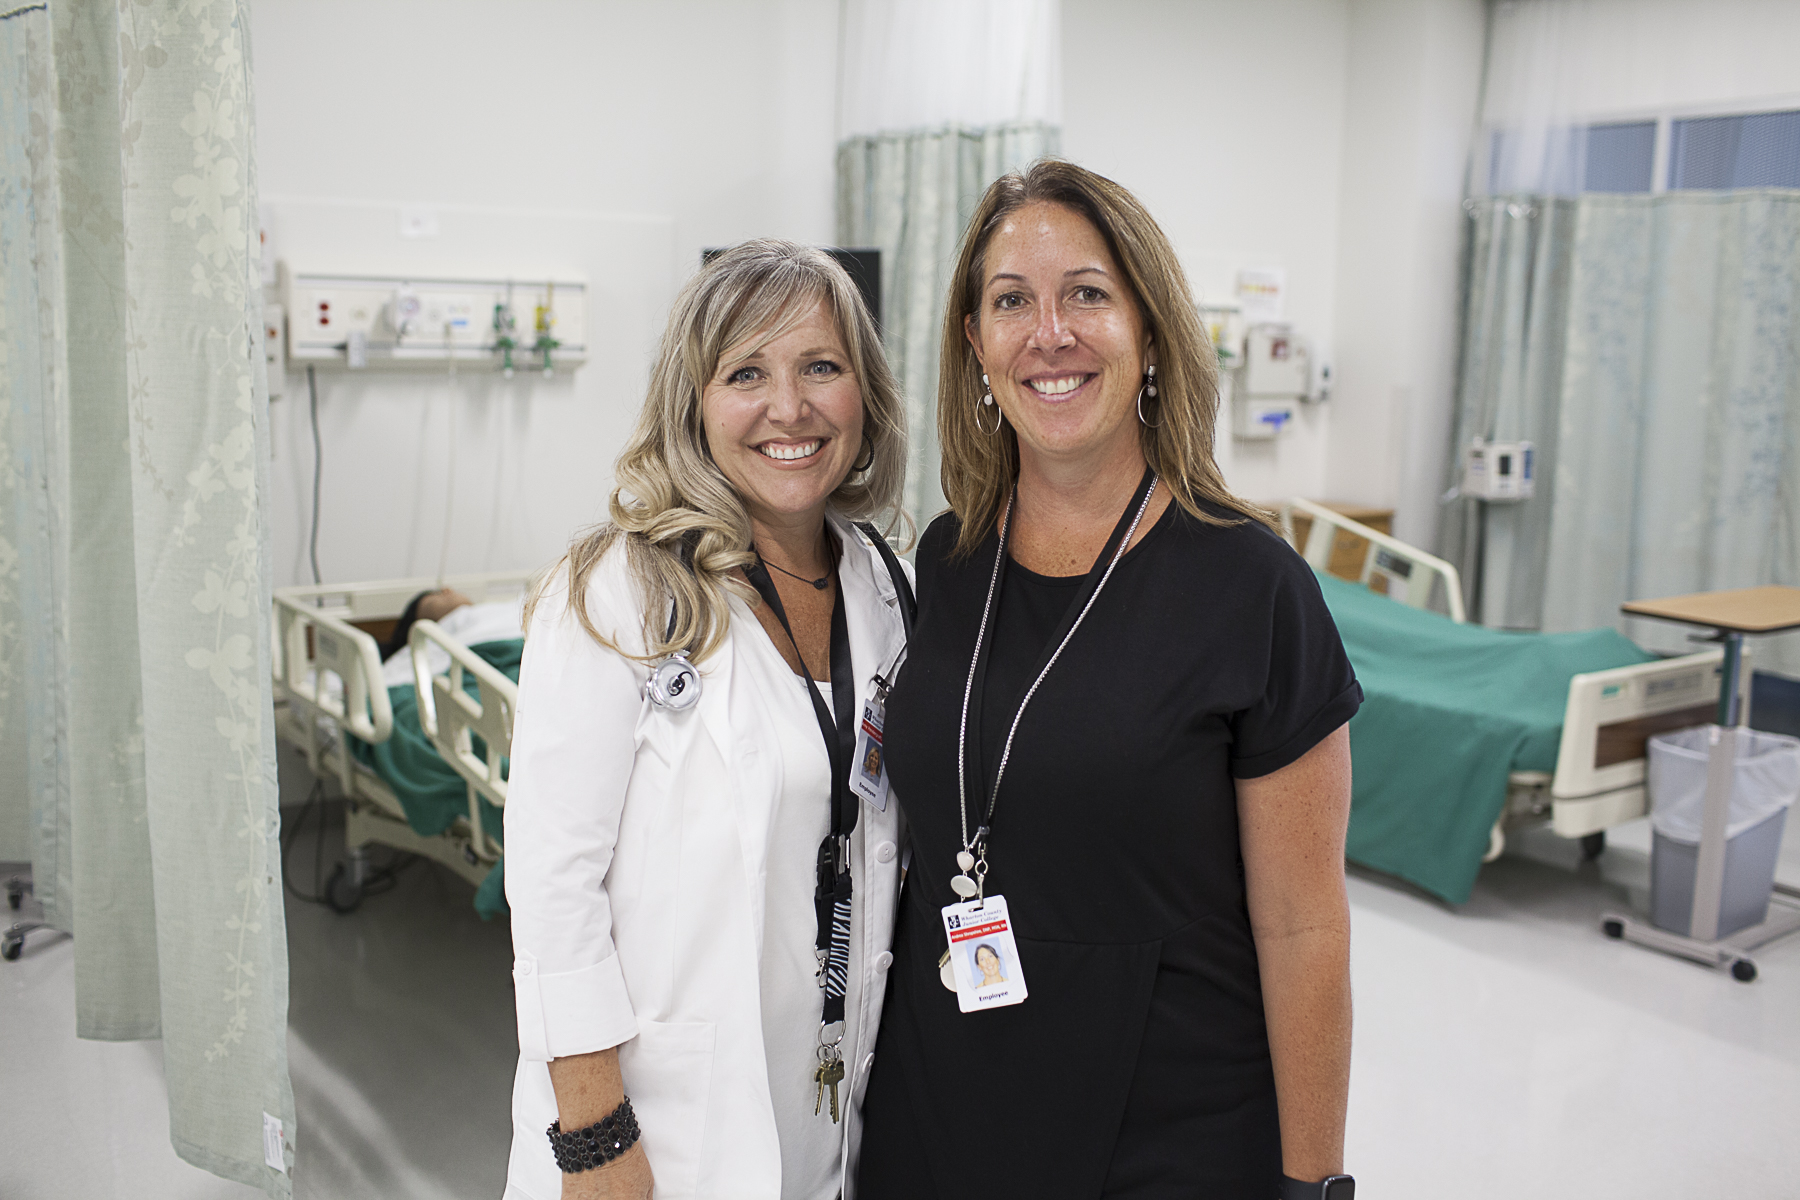 OPEN HOUSE - WCJC hosts open house for healthcare simulation lab